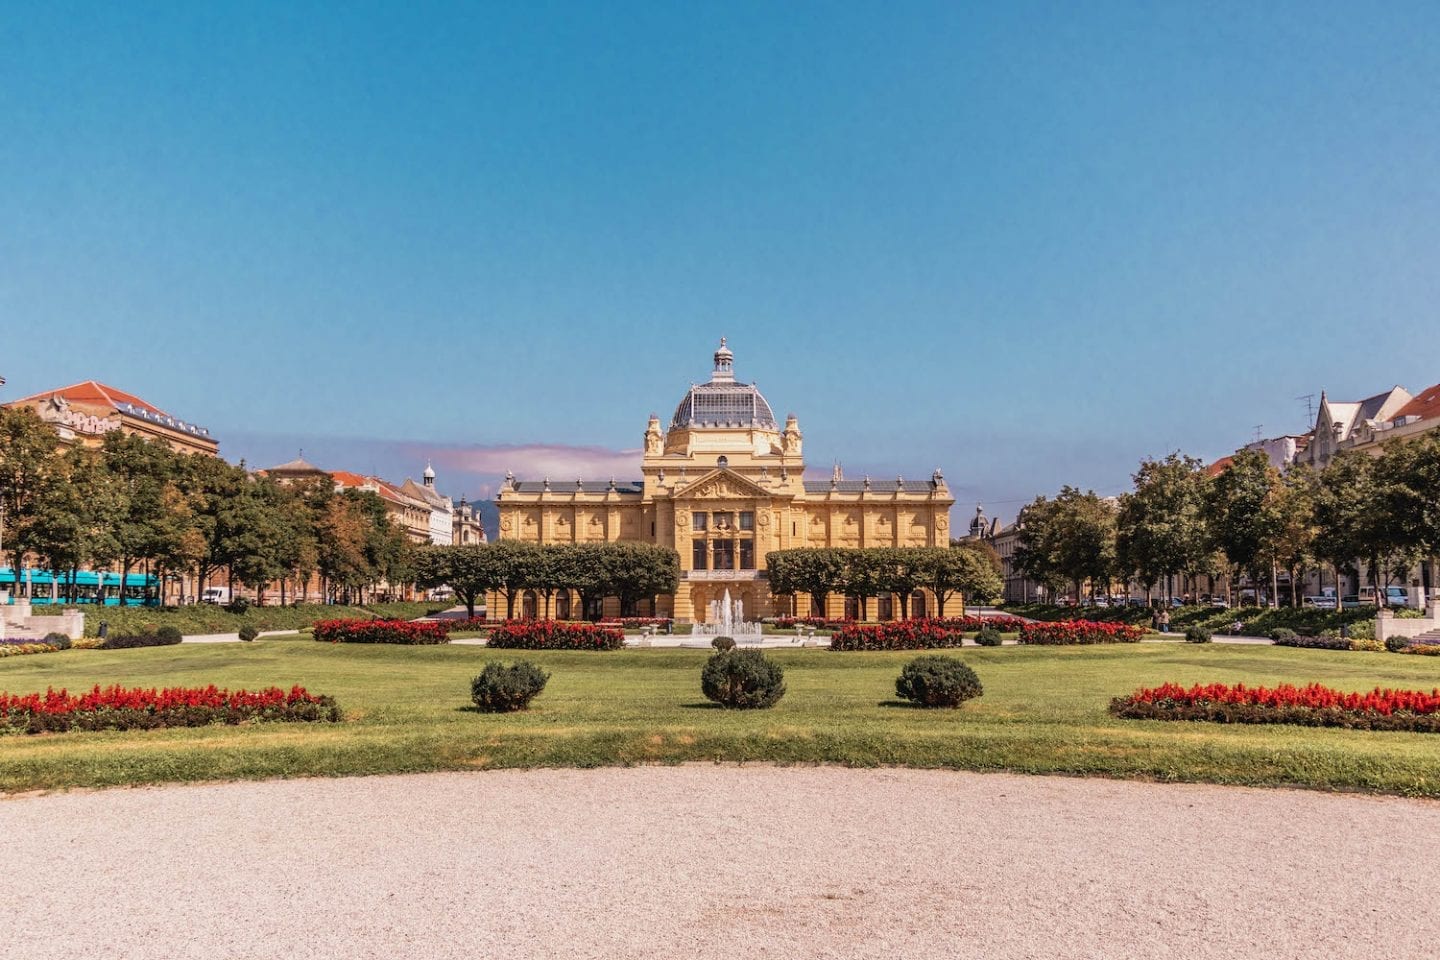 The 10 Best Things To Do In Zagreb, Croatia - She Goes The Distance